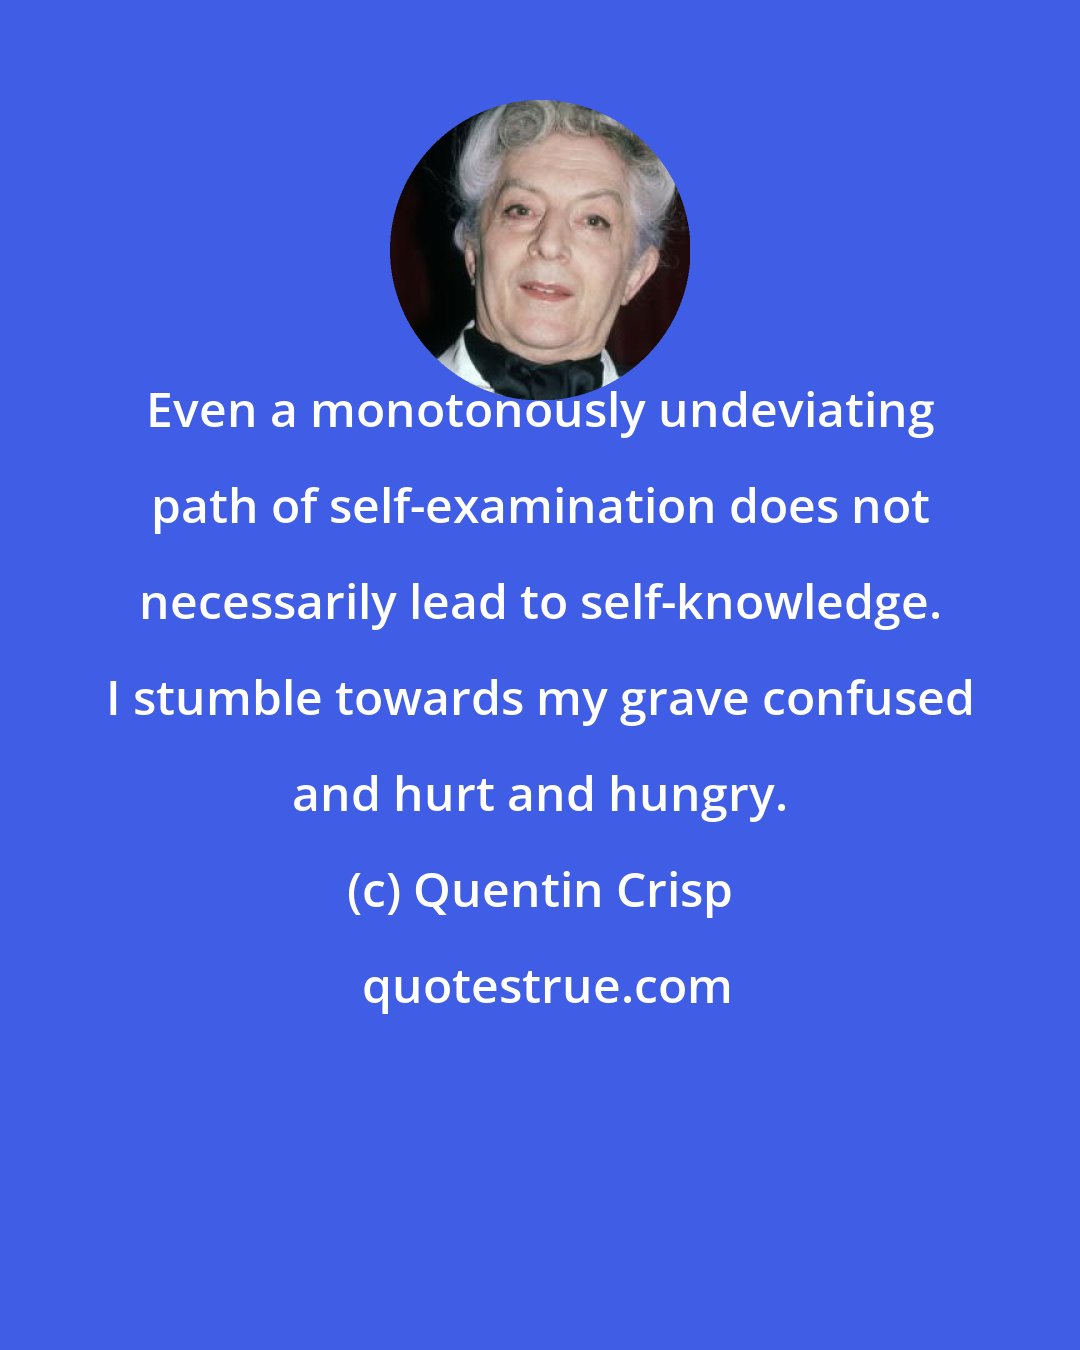 Quentin Crisp: Even a monotonously undeviating path of self-examination does not necessarily lead to self-knowledge. I stumble towards my grave confused and hurt and hungry.